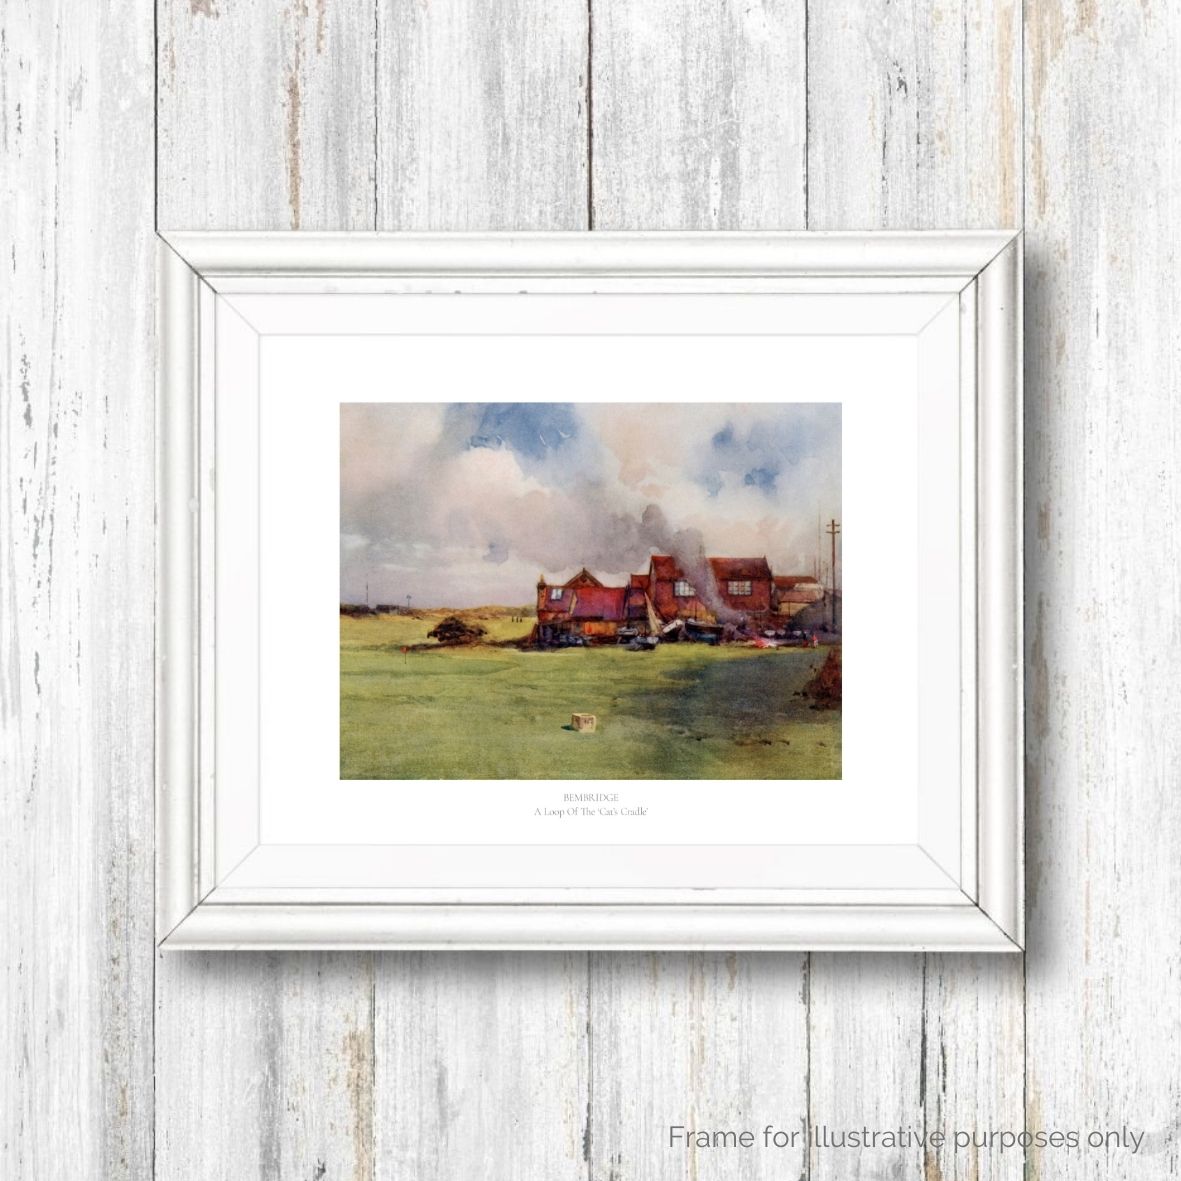 Royal Isle of Wight Golf Club framed print with text by Harry Rountree